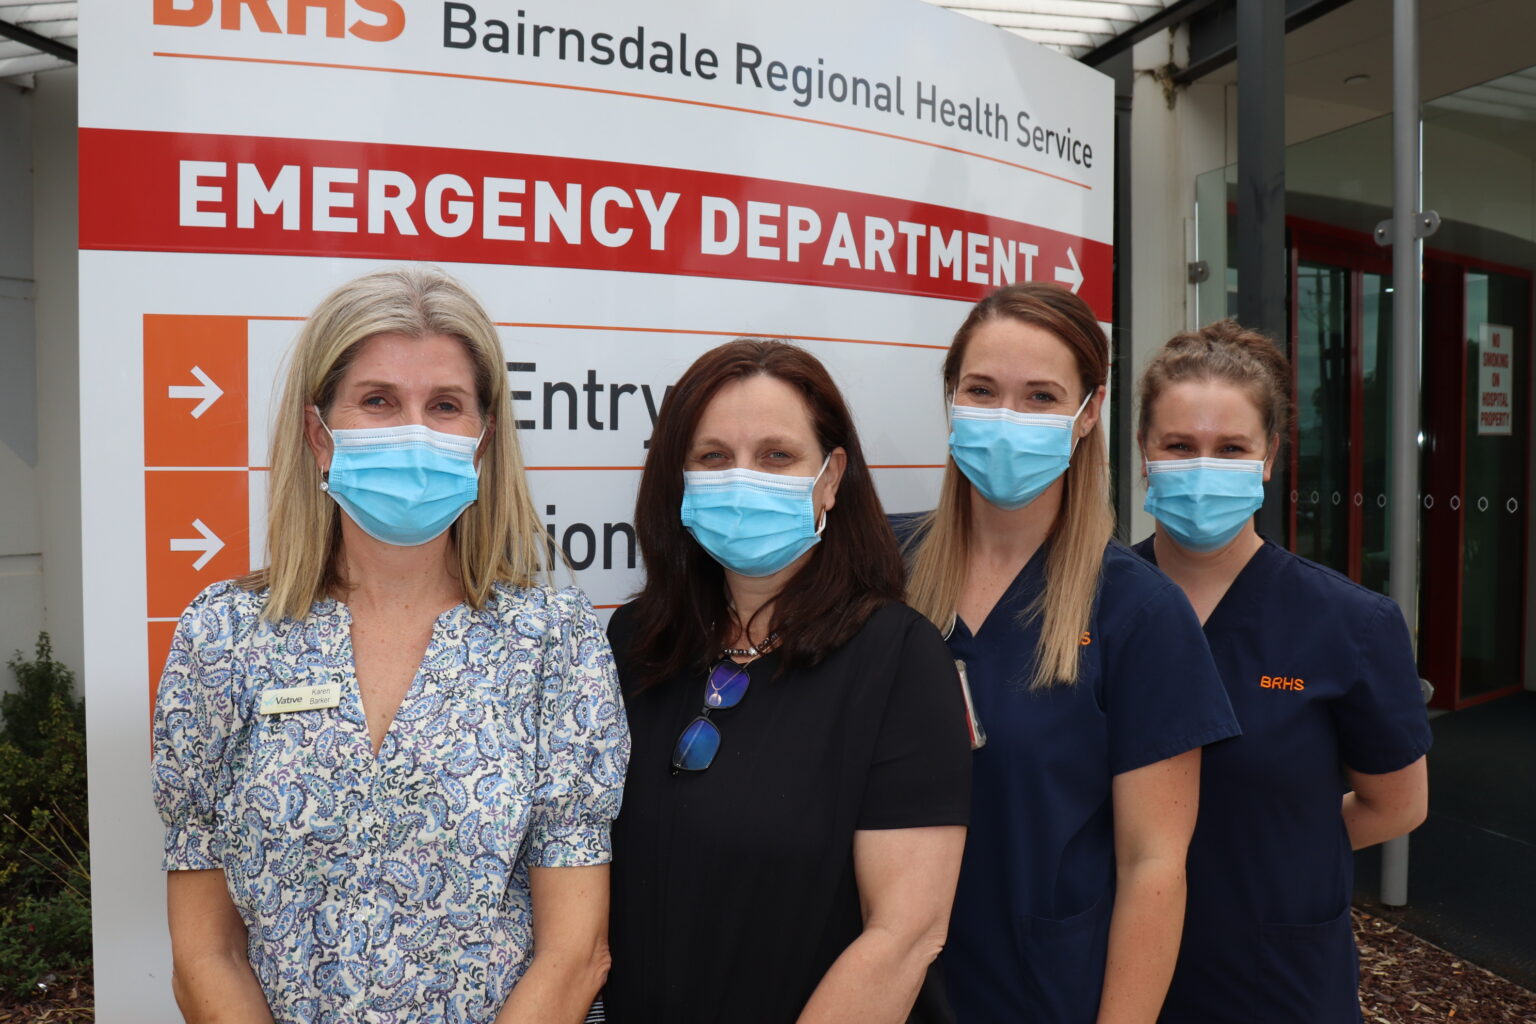 Four women, each wearing surgical masks, stand side by side in front of a BRHS sign directing visitors to the Emergency Department.